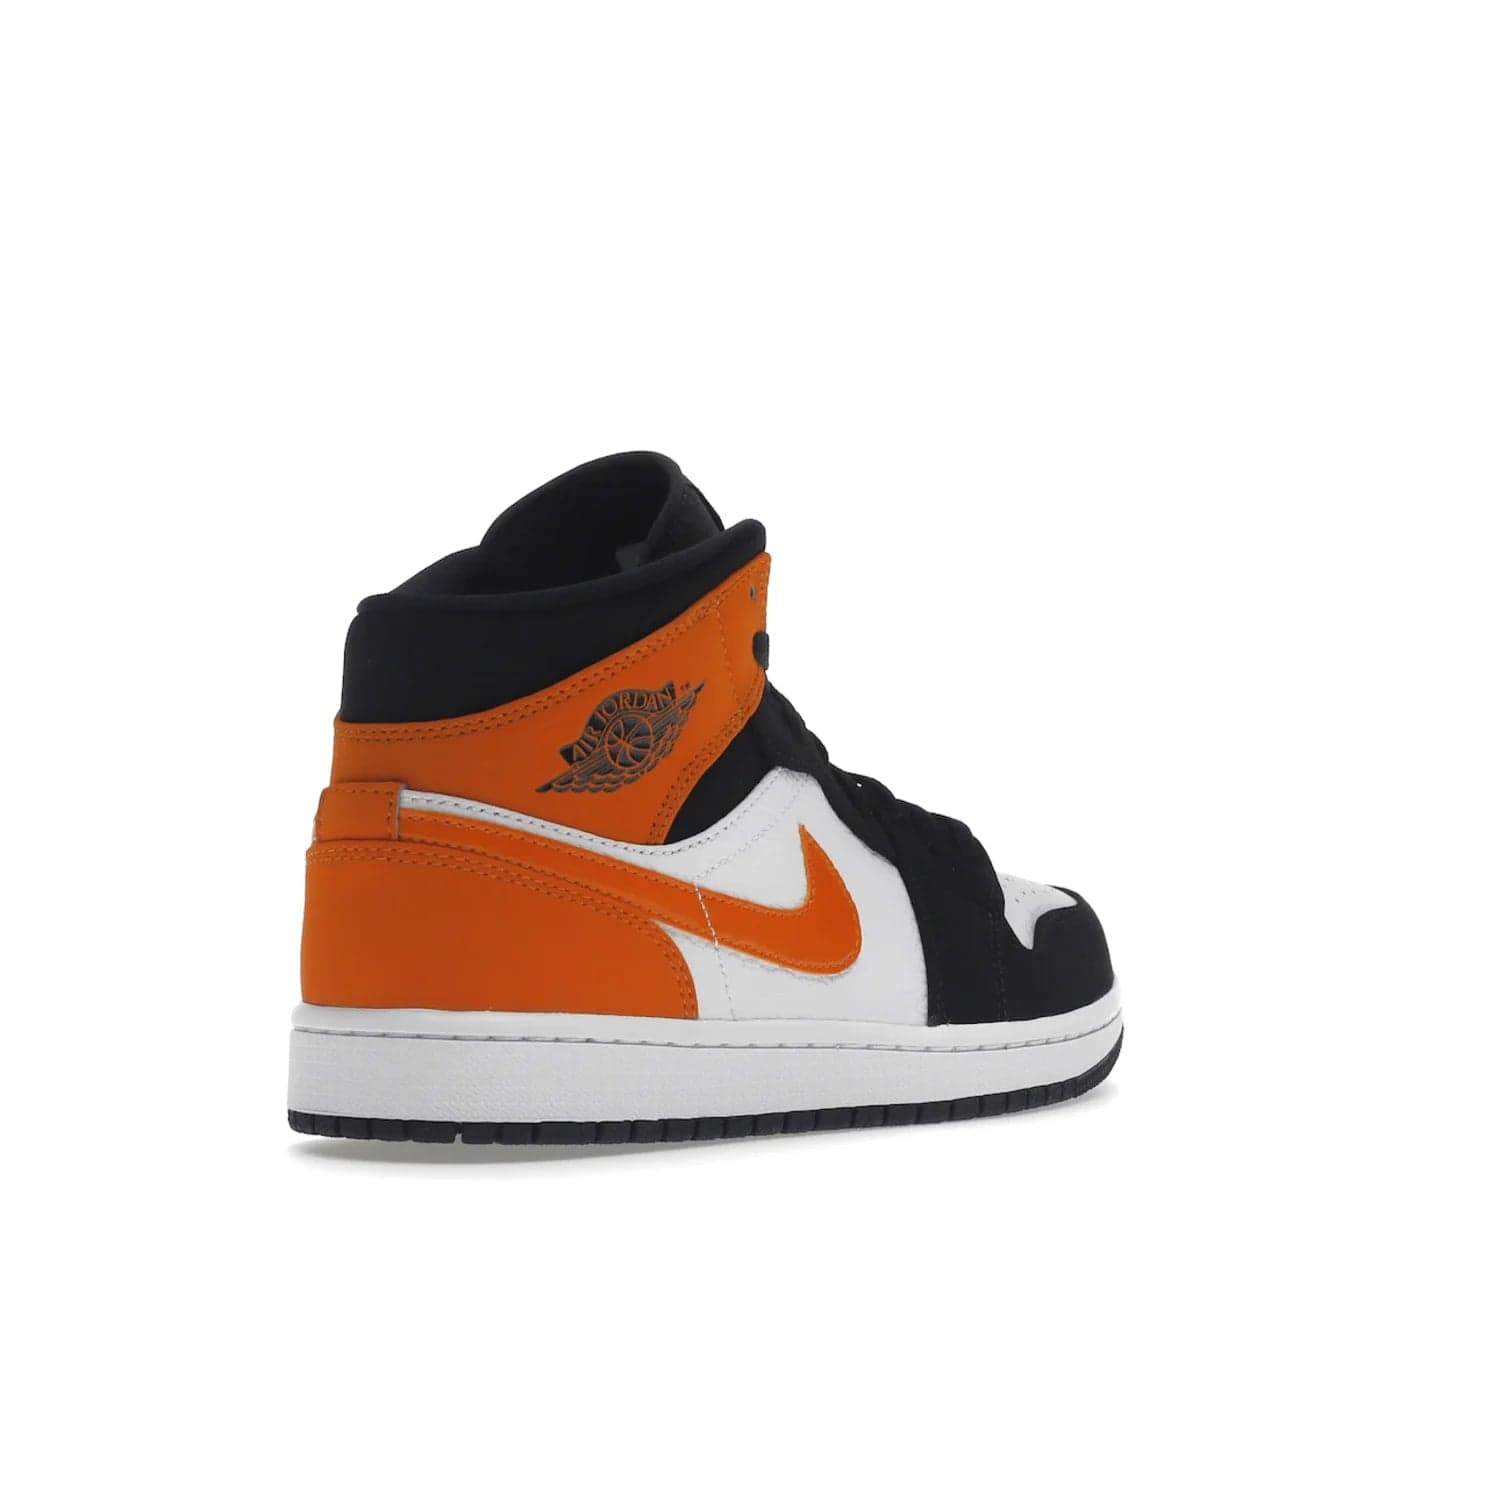 Jordan 1 Mid Shattered Backboard - Image 32 - Only at www.BallersClubKickz.com - The Air Jordan 1 Mid Shattered Backboard offers a timeless Black/White-Starfish colorway. Classic Swoosh logo and AJ insignia plus a shatterd backboard graphic on the insole. Get your pair today!